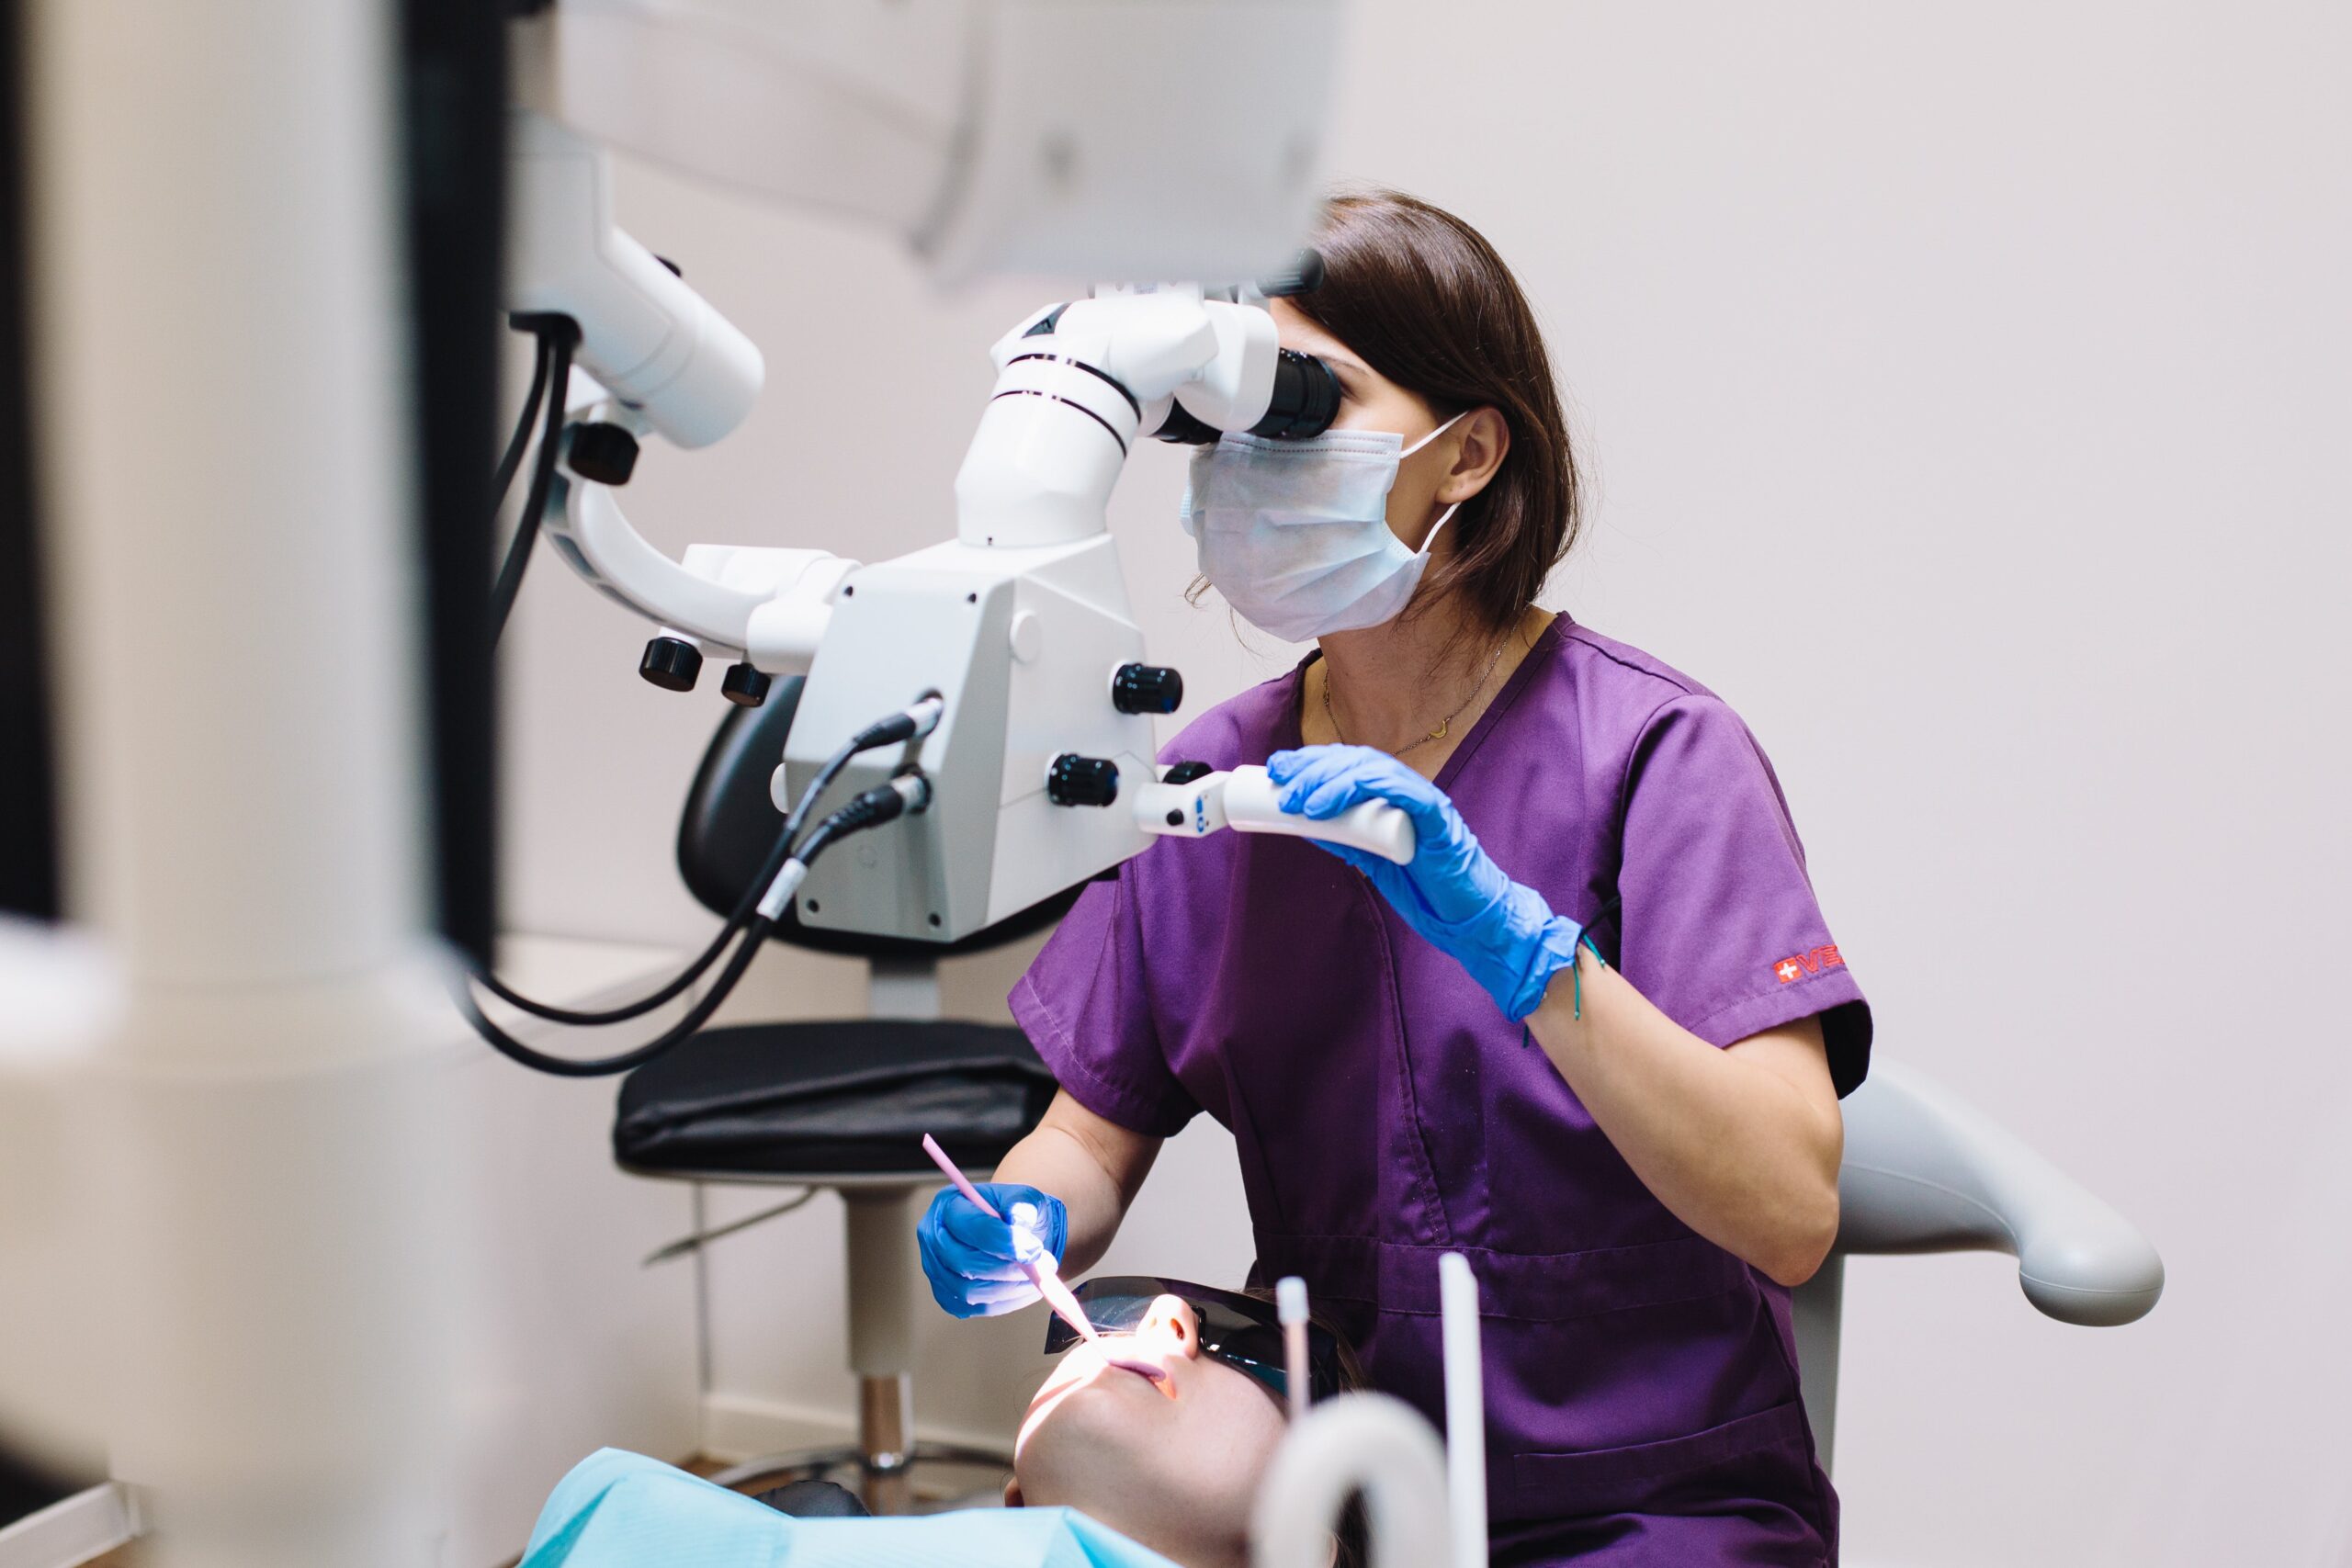 Dentist using technology on Patient | Top Dentist and Periodontist for root canals, veneers, dental fillings, wisdom teeth extractions, gum disease therapy, and more | Houston 77077